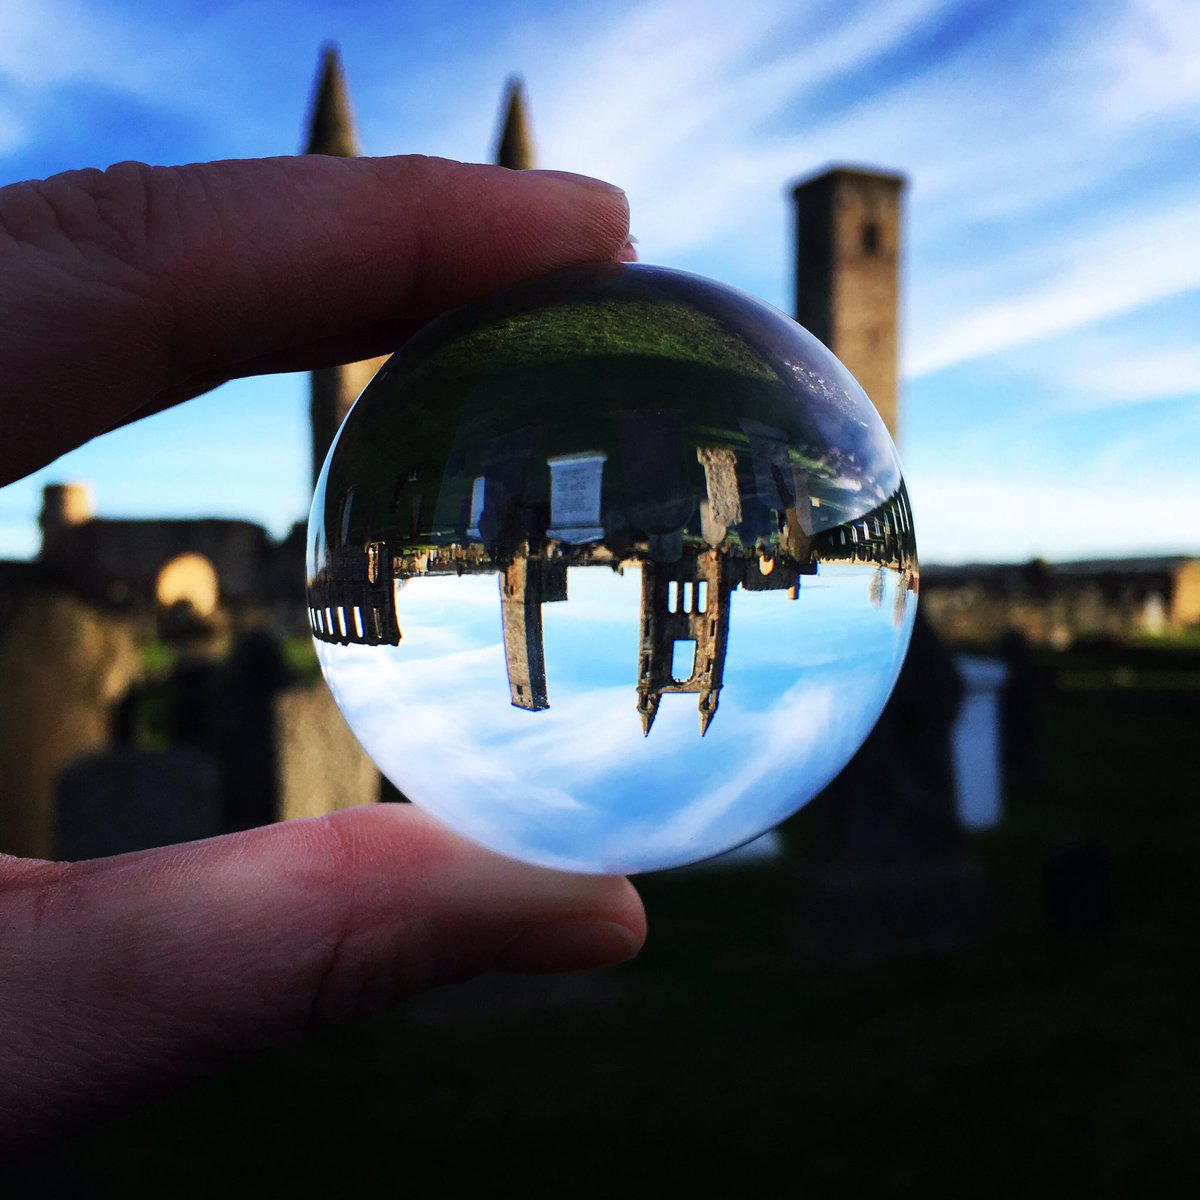 #StAndrewsCathedral with a different perspective... #Lensball #photography #seaside #Fife #Scotland #makethemostofit #liveinthemoment